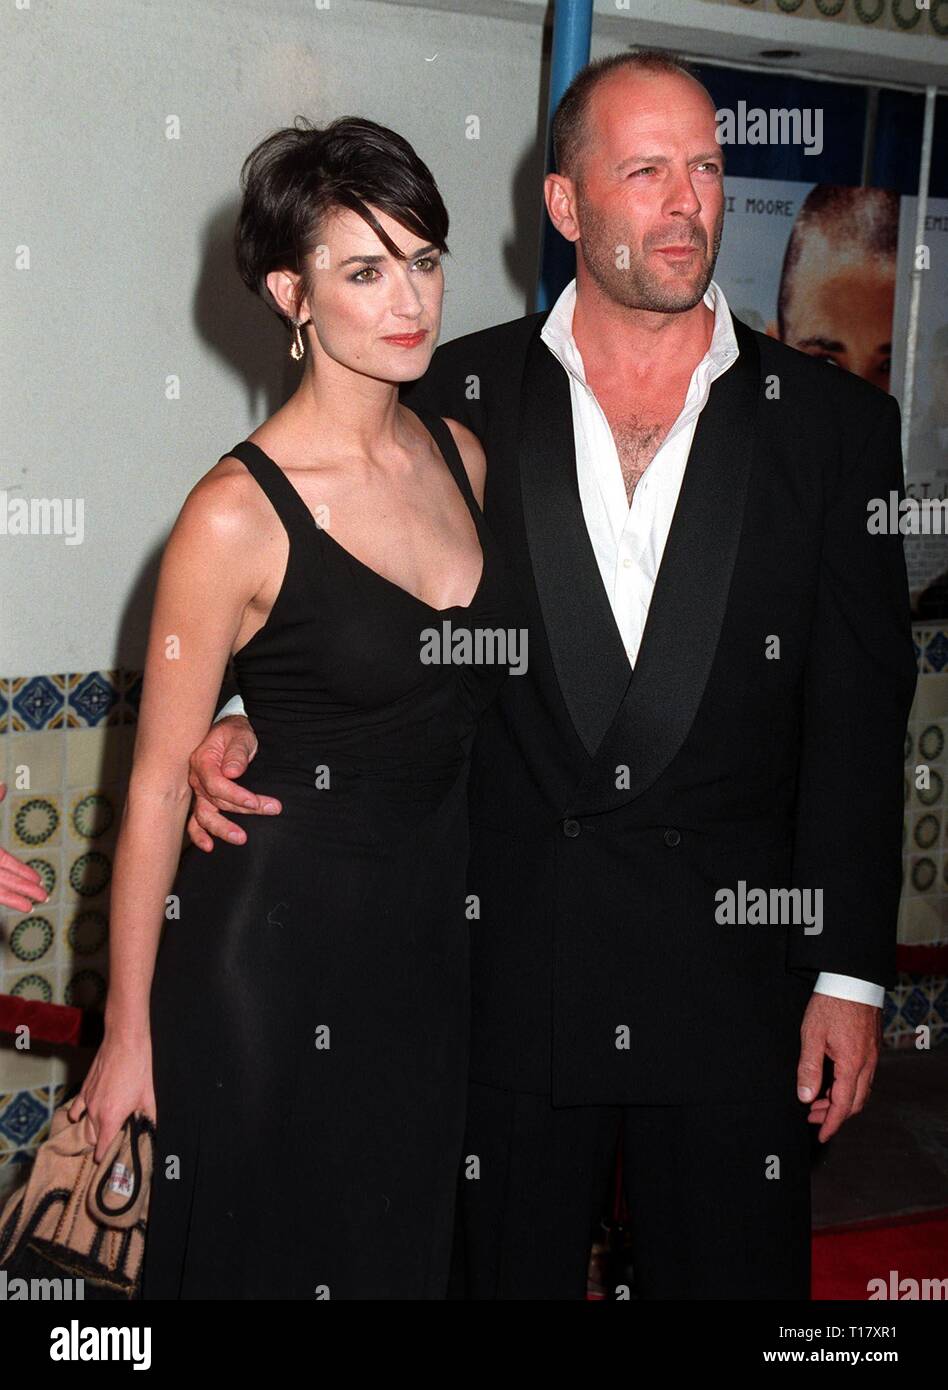 LOS ANGELES, CA. August 06, 1997: Actress Demi Moore & husband Bruce Willis at the premiere, in Los Angeles, of her new movie, 'G.I. Jane.' Stock Photo